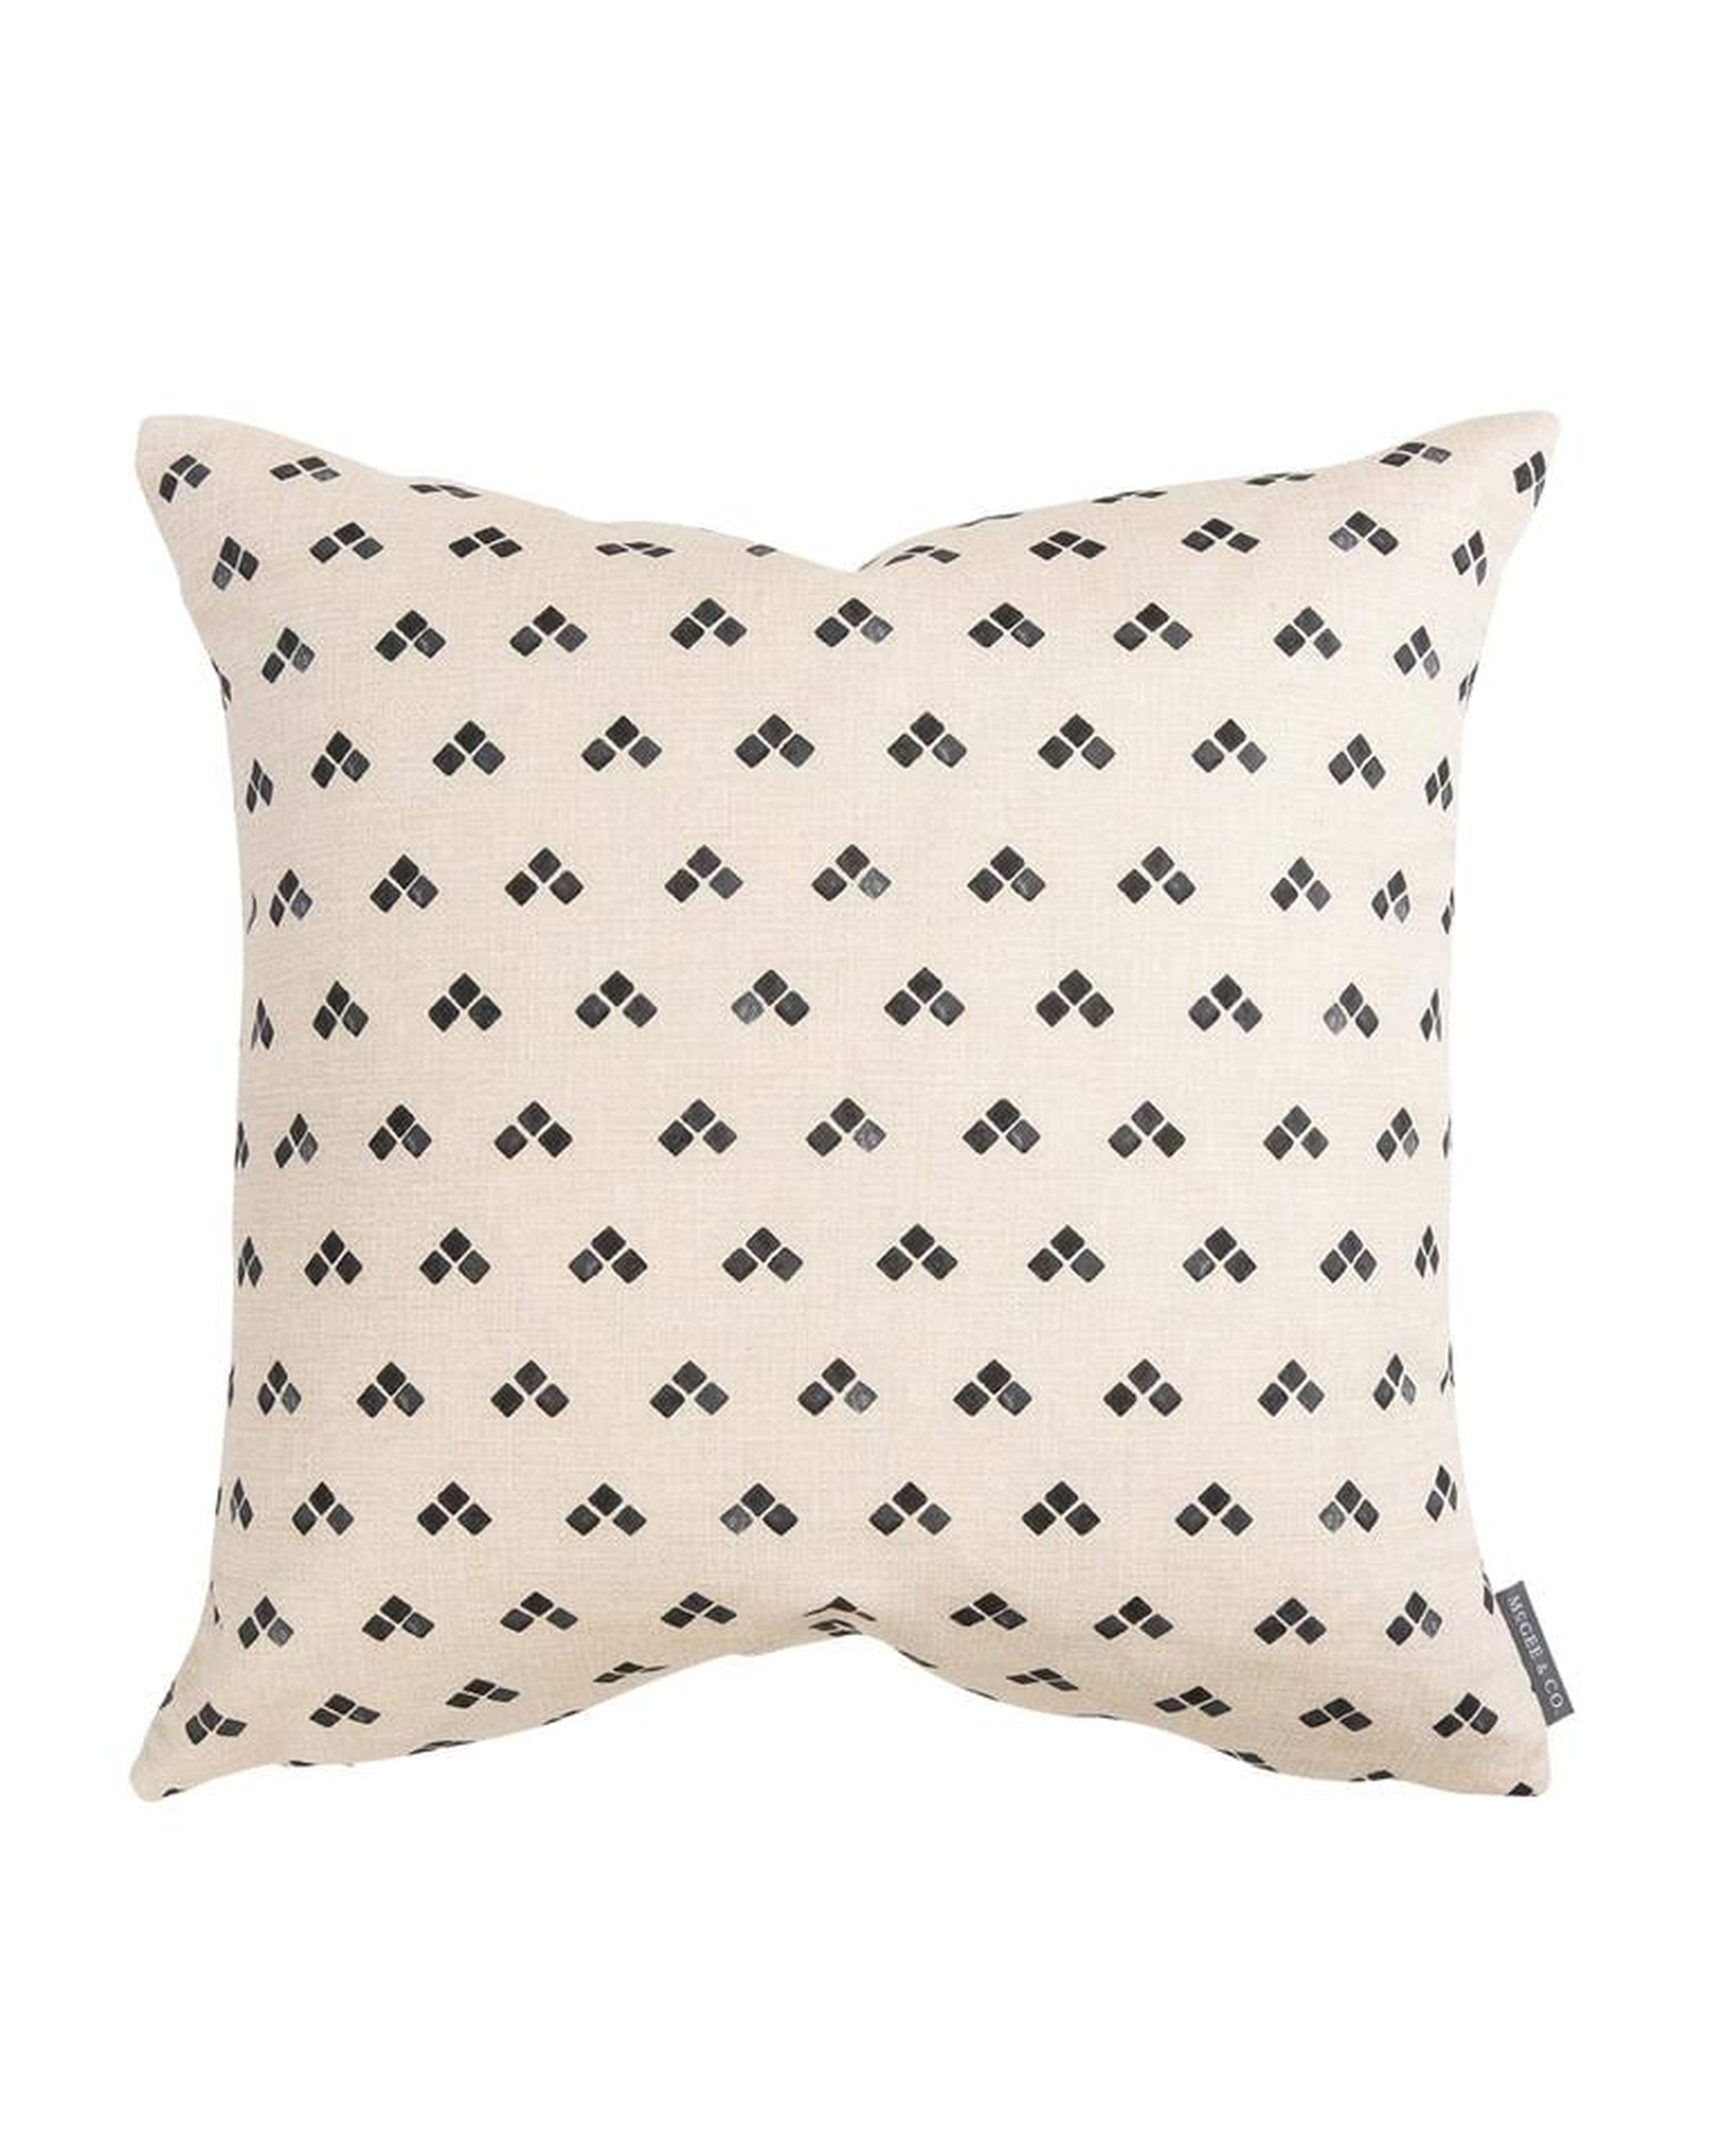 NORAH GEO PRINT PILLOW COVER, 20" x 20", CHARCOAL - McGee & Co.